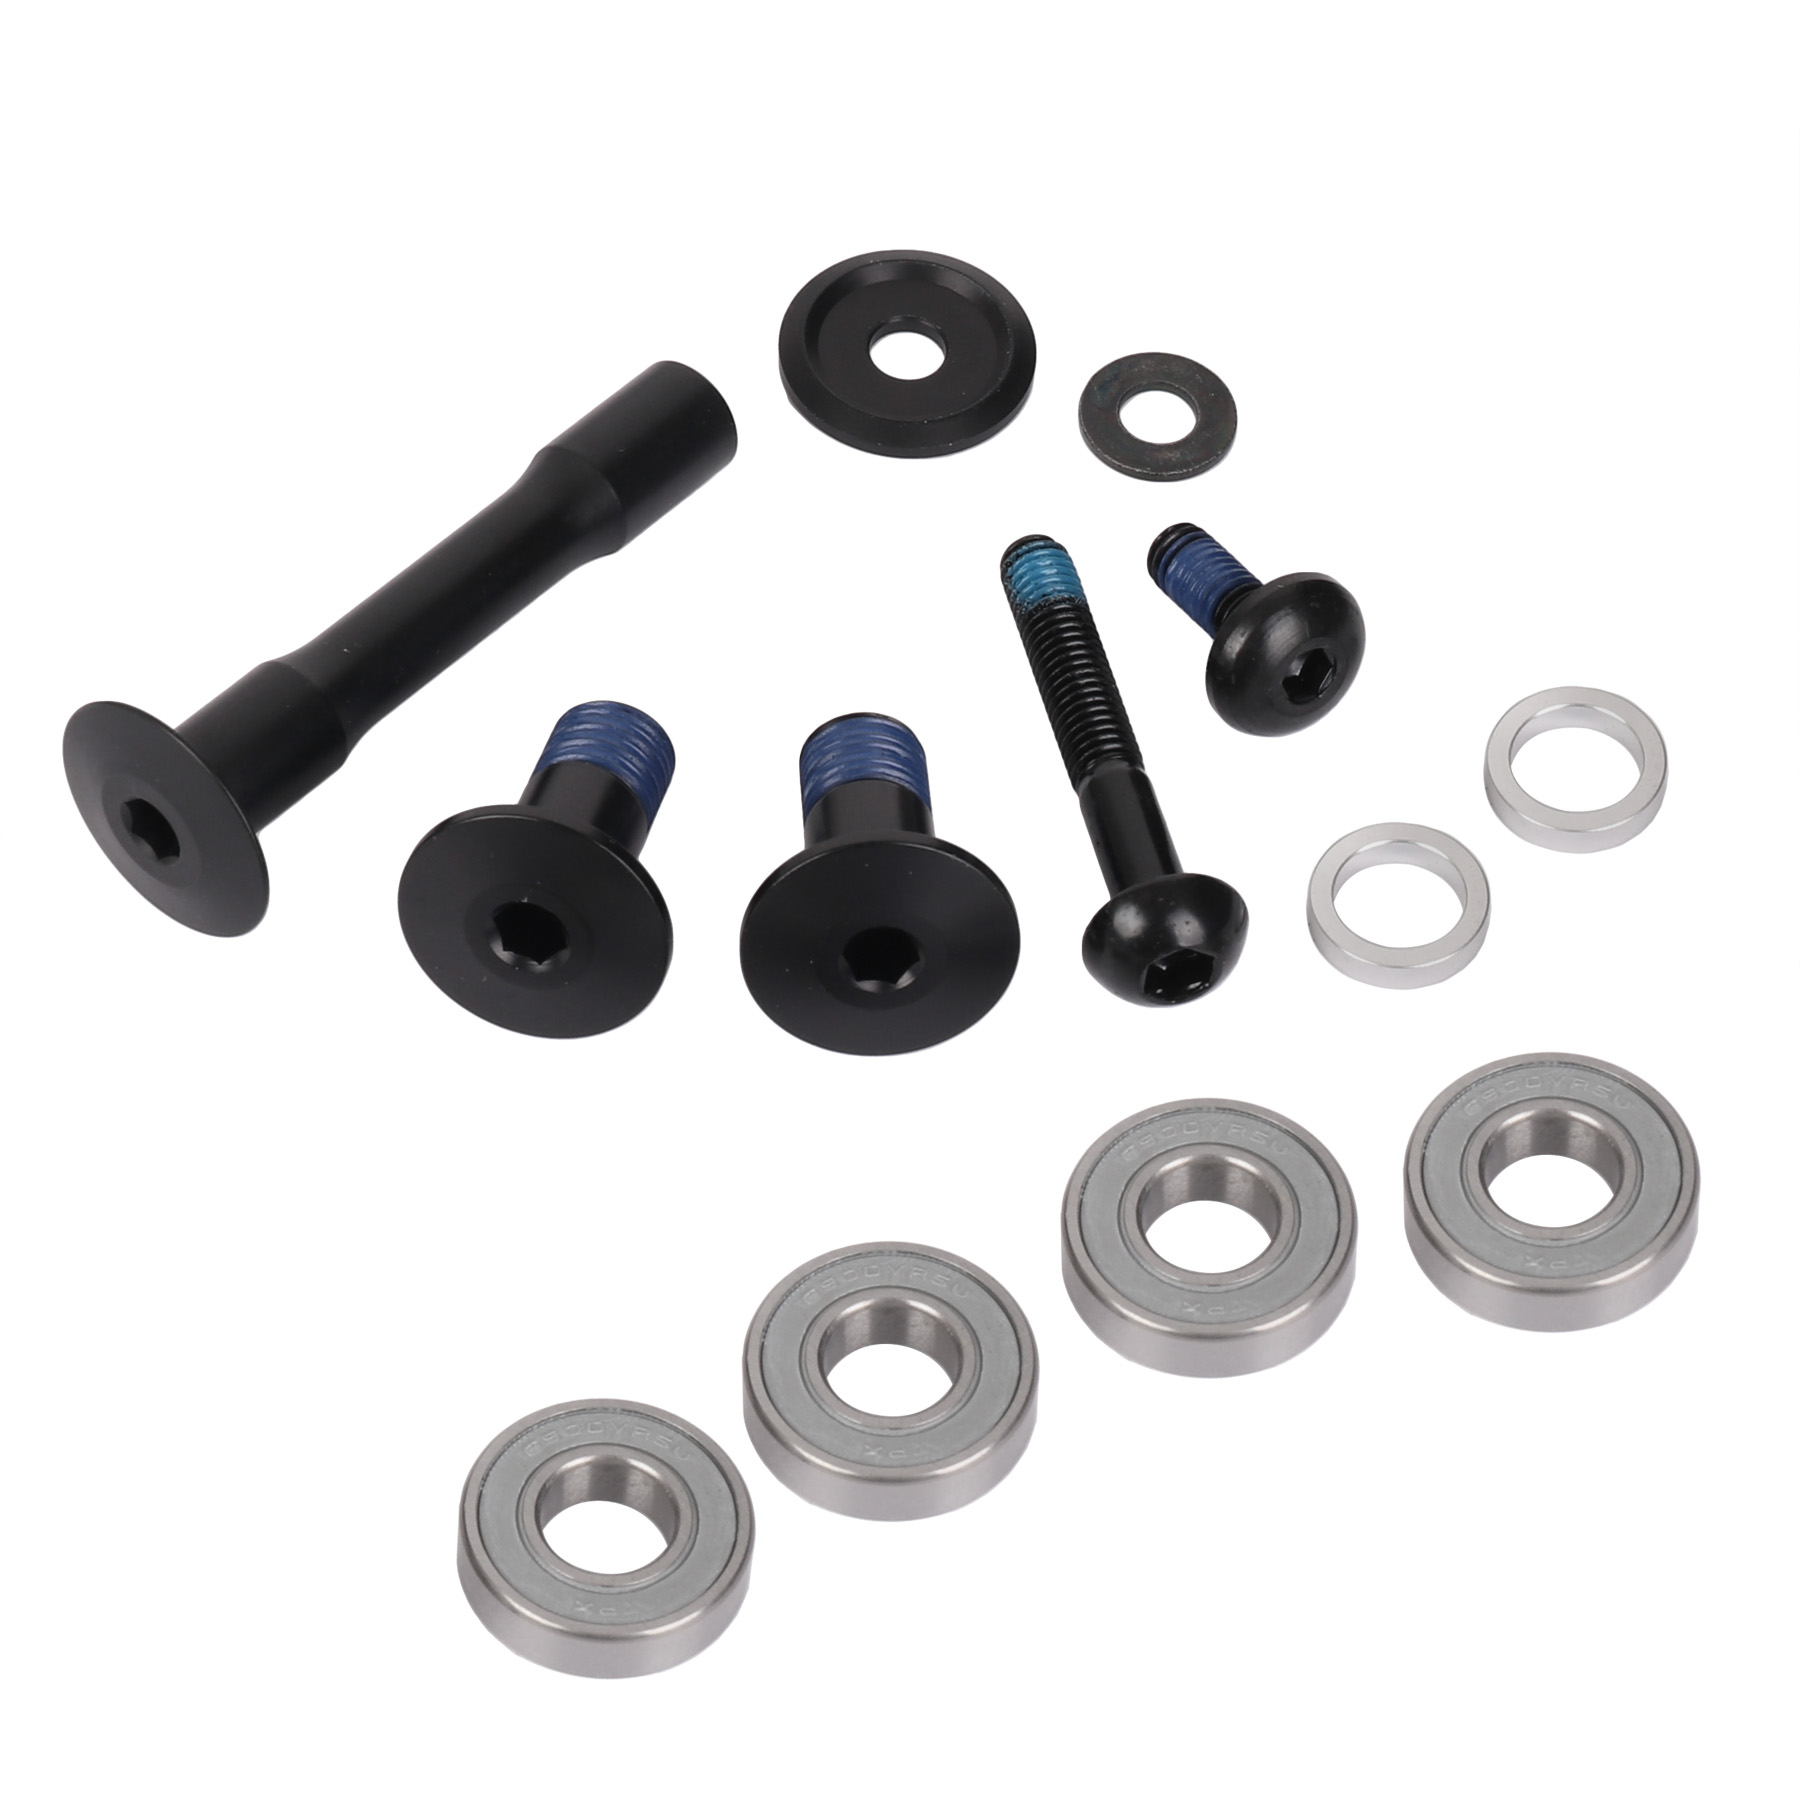 Picture of Giant GSF032 Rear Shock Accessories for Stance / Embolden | Rock Arm Bolt Kit - 1280GSF03204A1